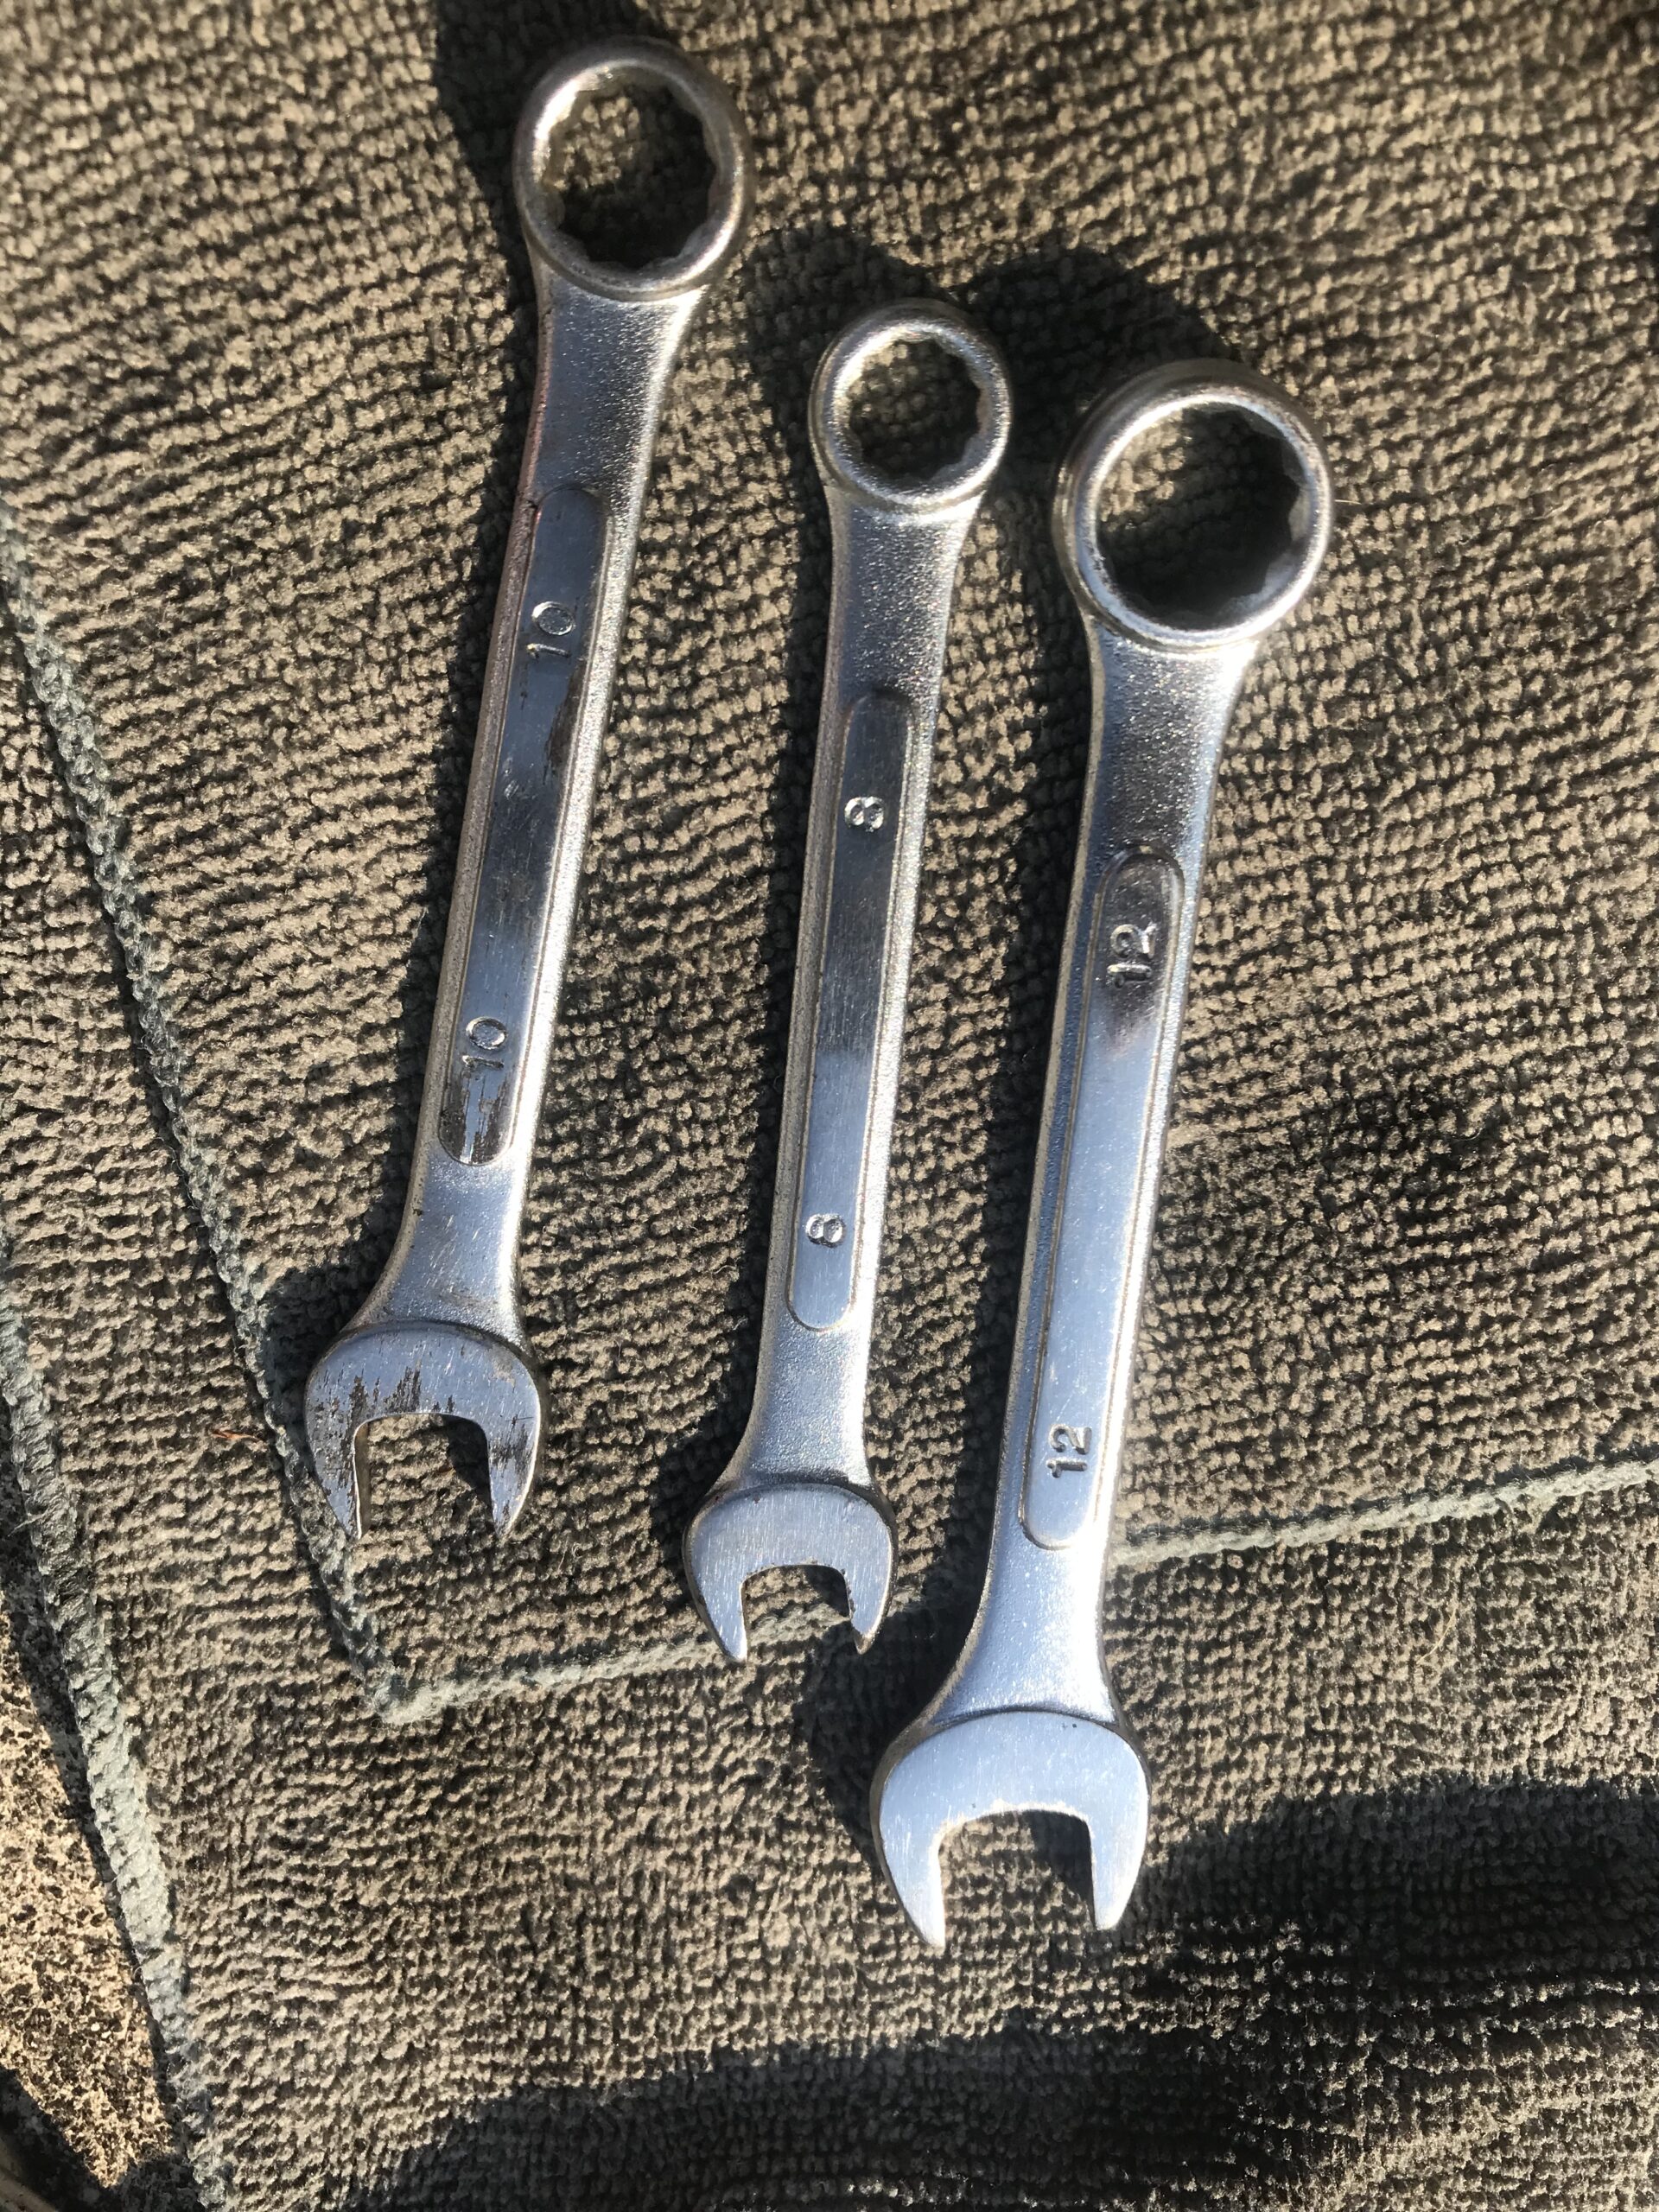 Wrench used for throttle wire